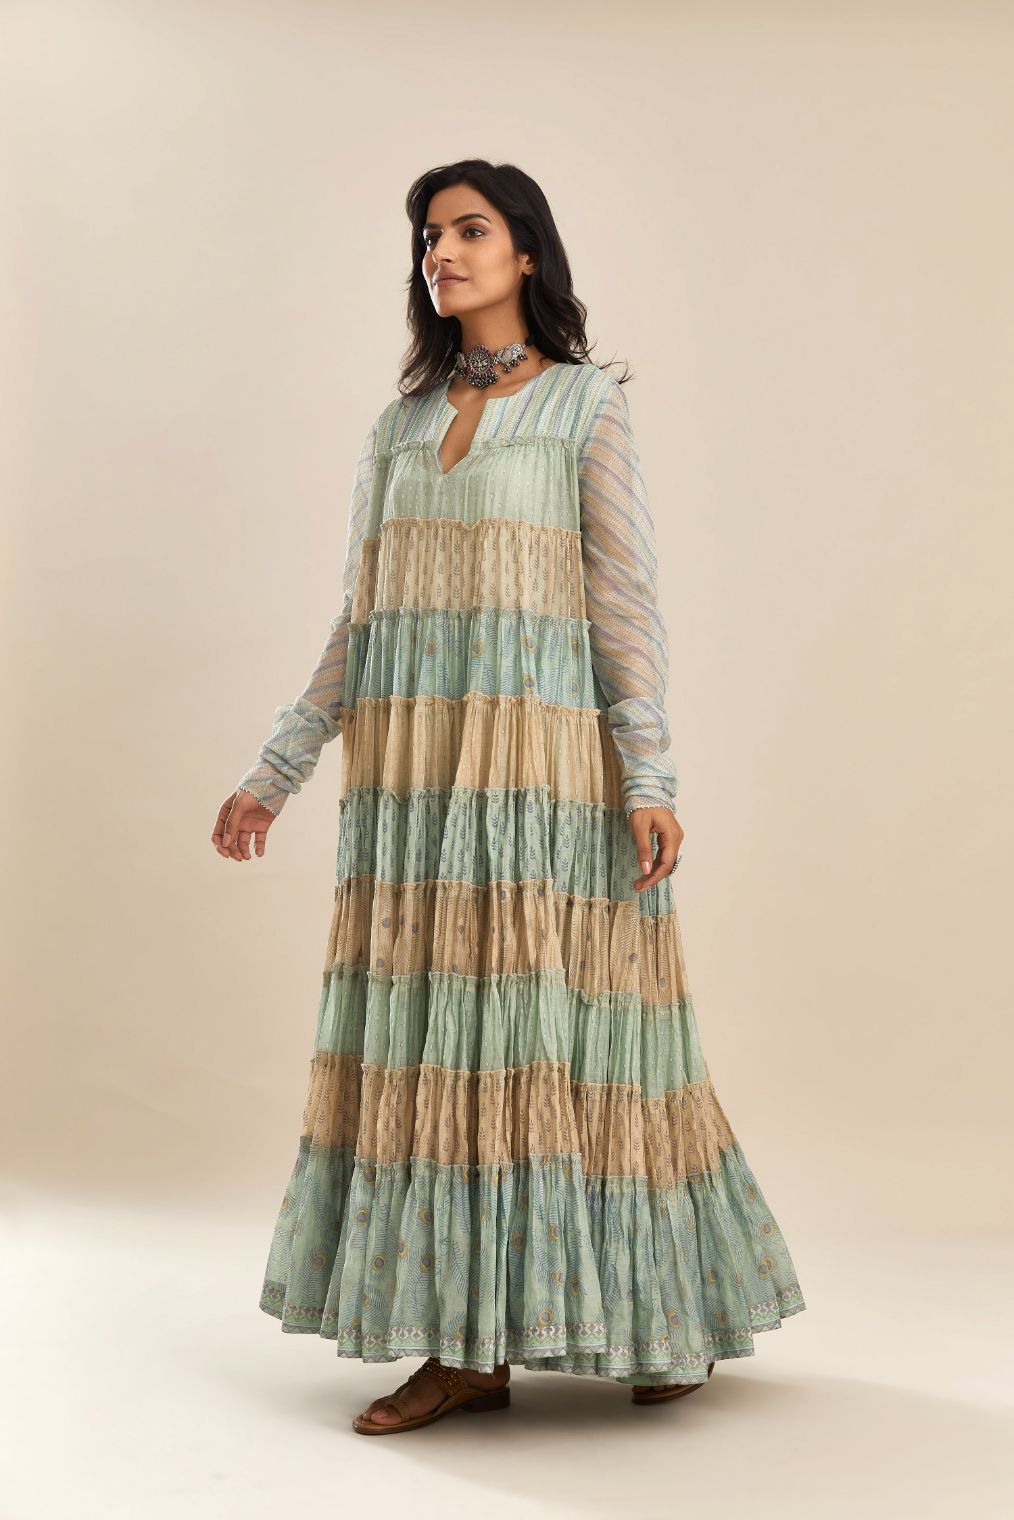 Hand block printed multi-tiered kurta dress set with churi sleeves and bead handwork detailing at neck and sleeves.